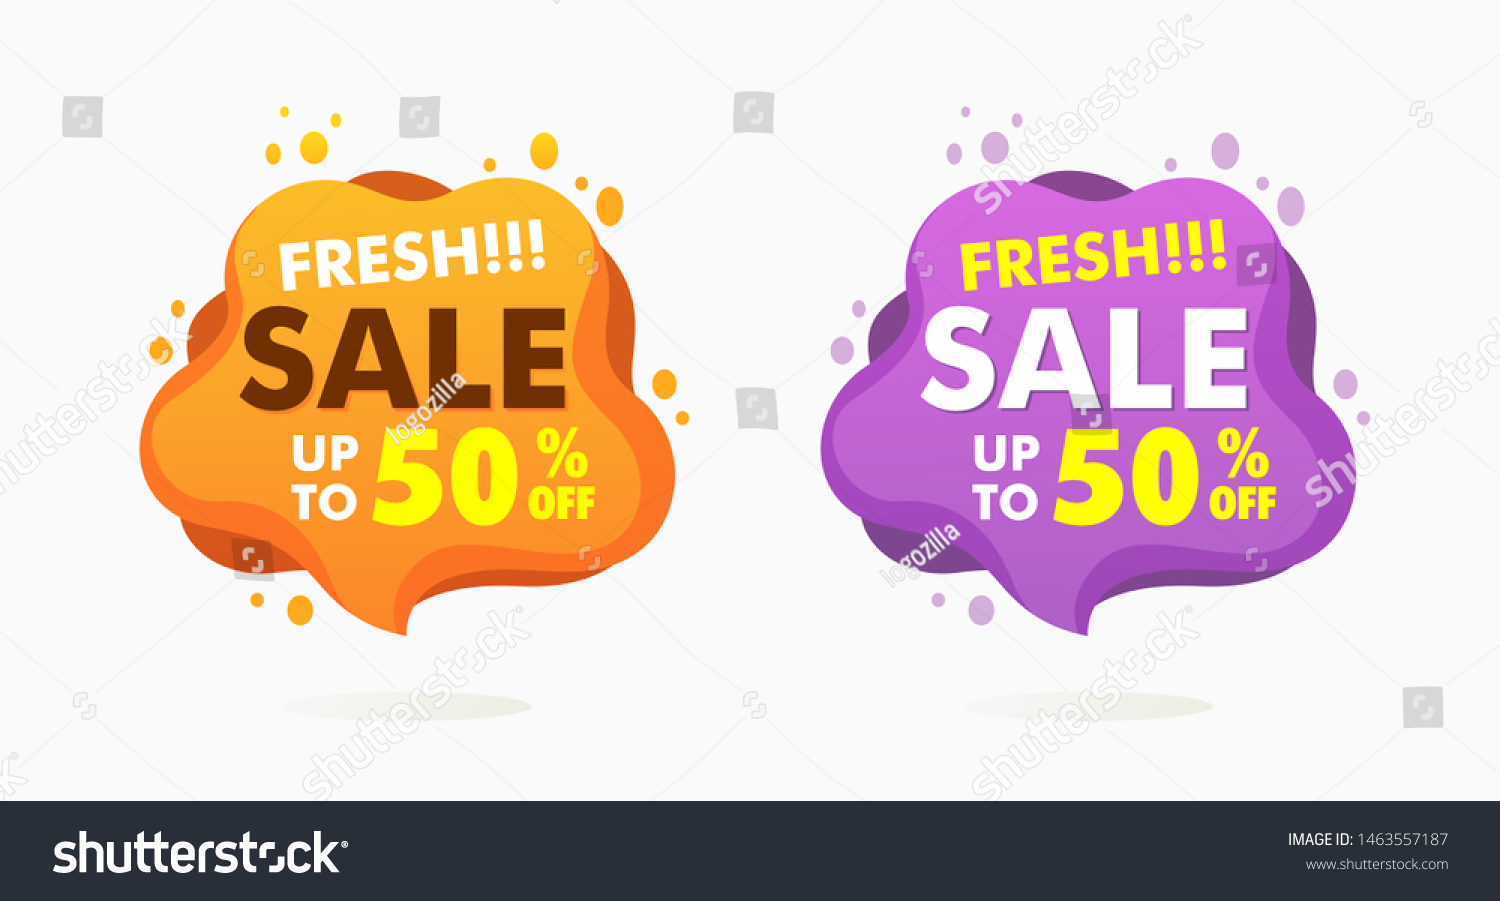 Flat Illustration Bubble Chat Instagram Banner Stock Vector Royalty Free